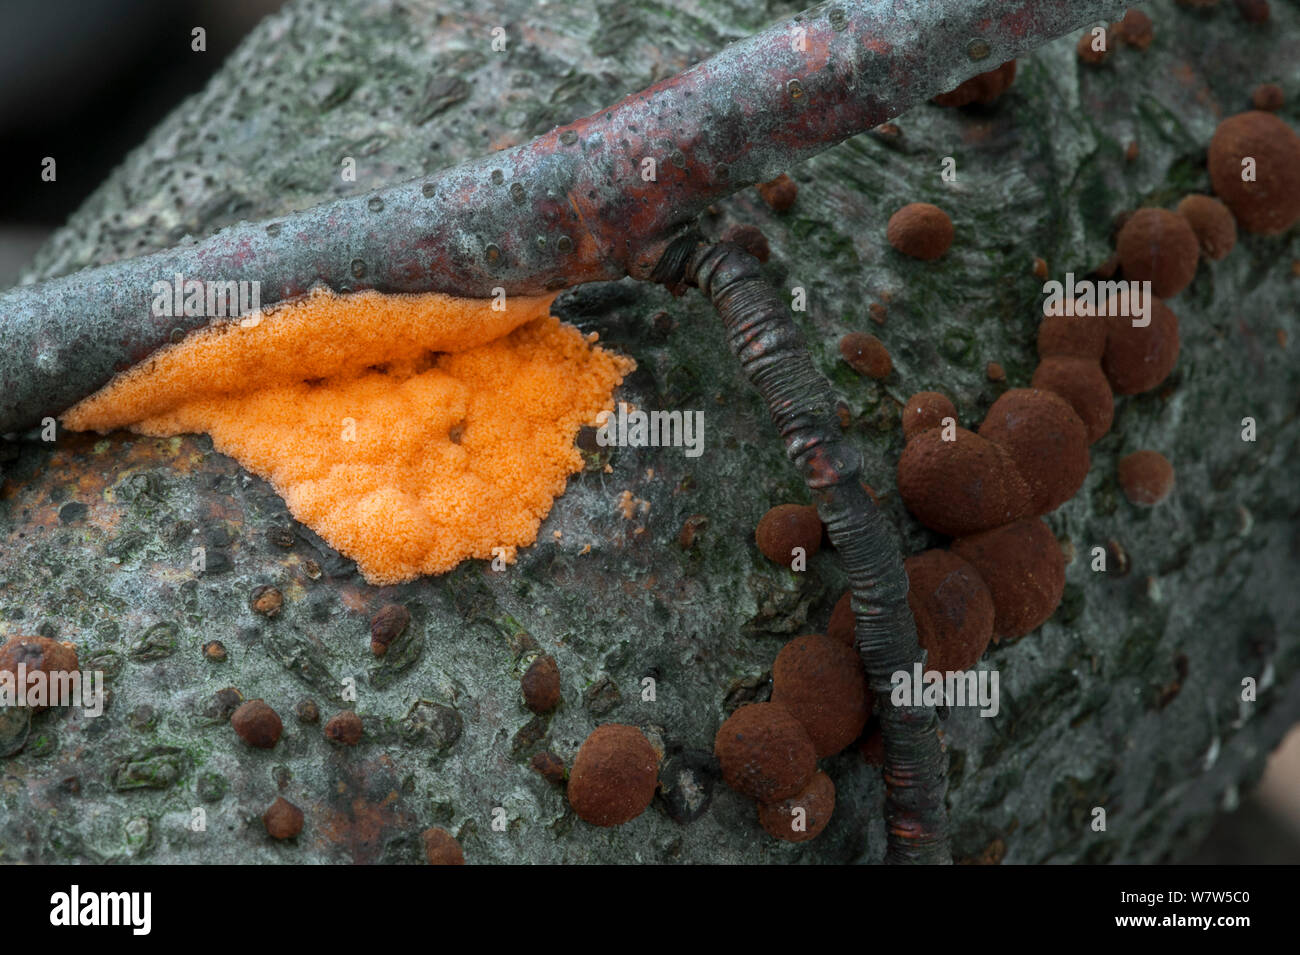 Slime mold (Dictydiaethalium plumbeum) and Beech woodwart (Hypoxylon fragiforme) growing on a branch, Belgium, October. Stock Photo